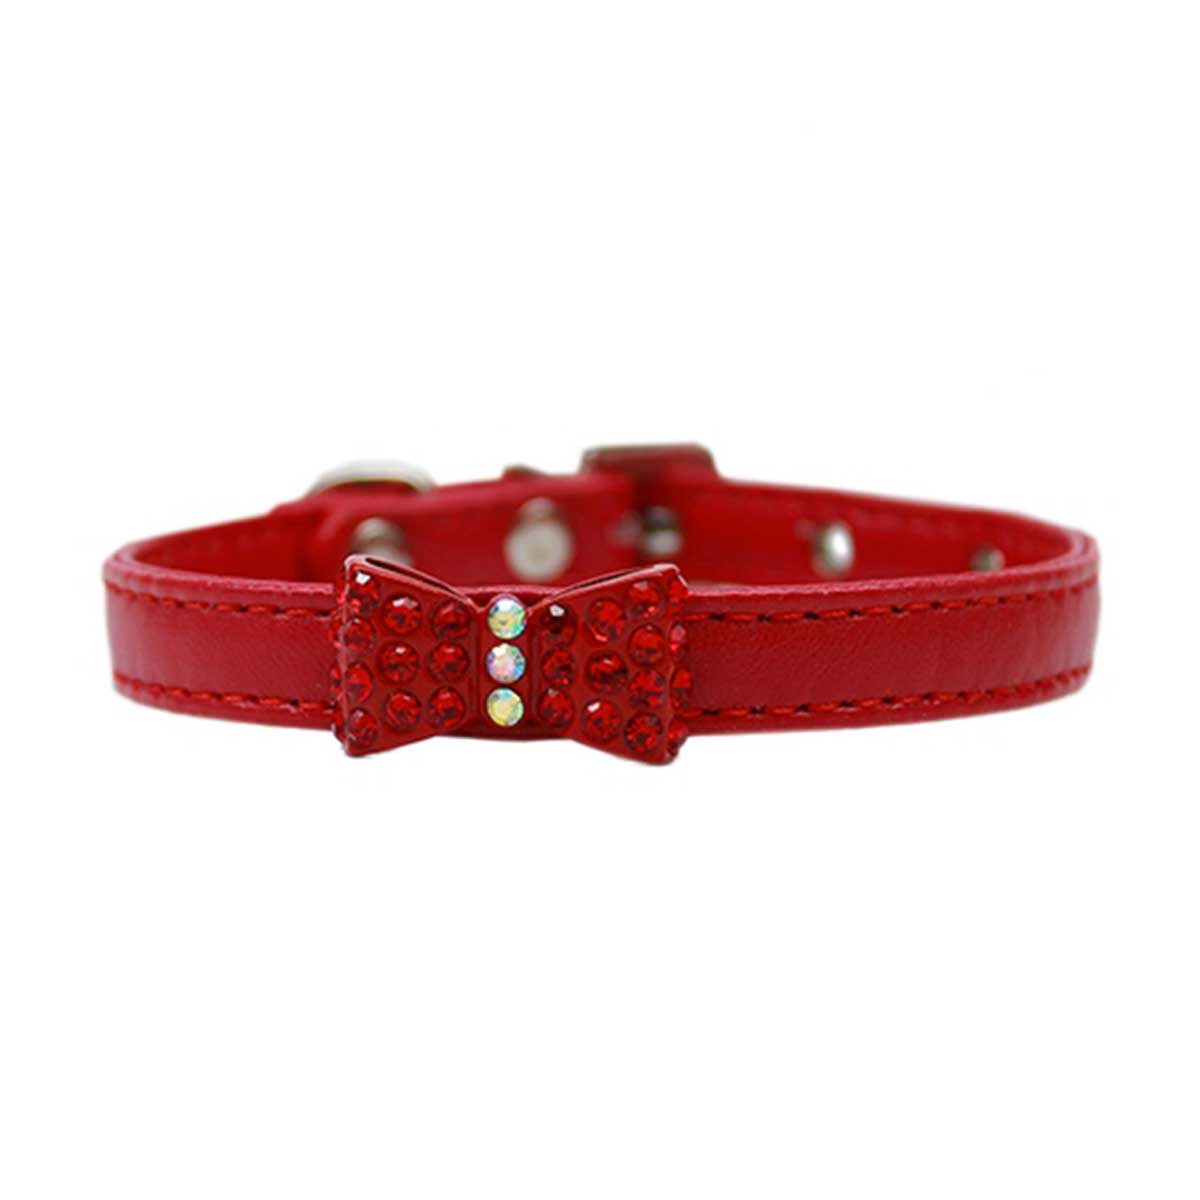 Bow-dacious Crystal Dog Collar in Red | Pawlicious & Company